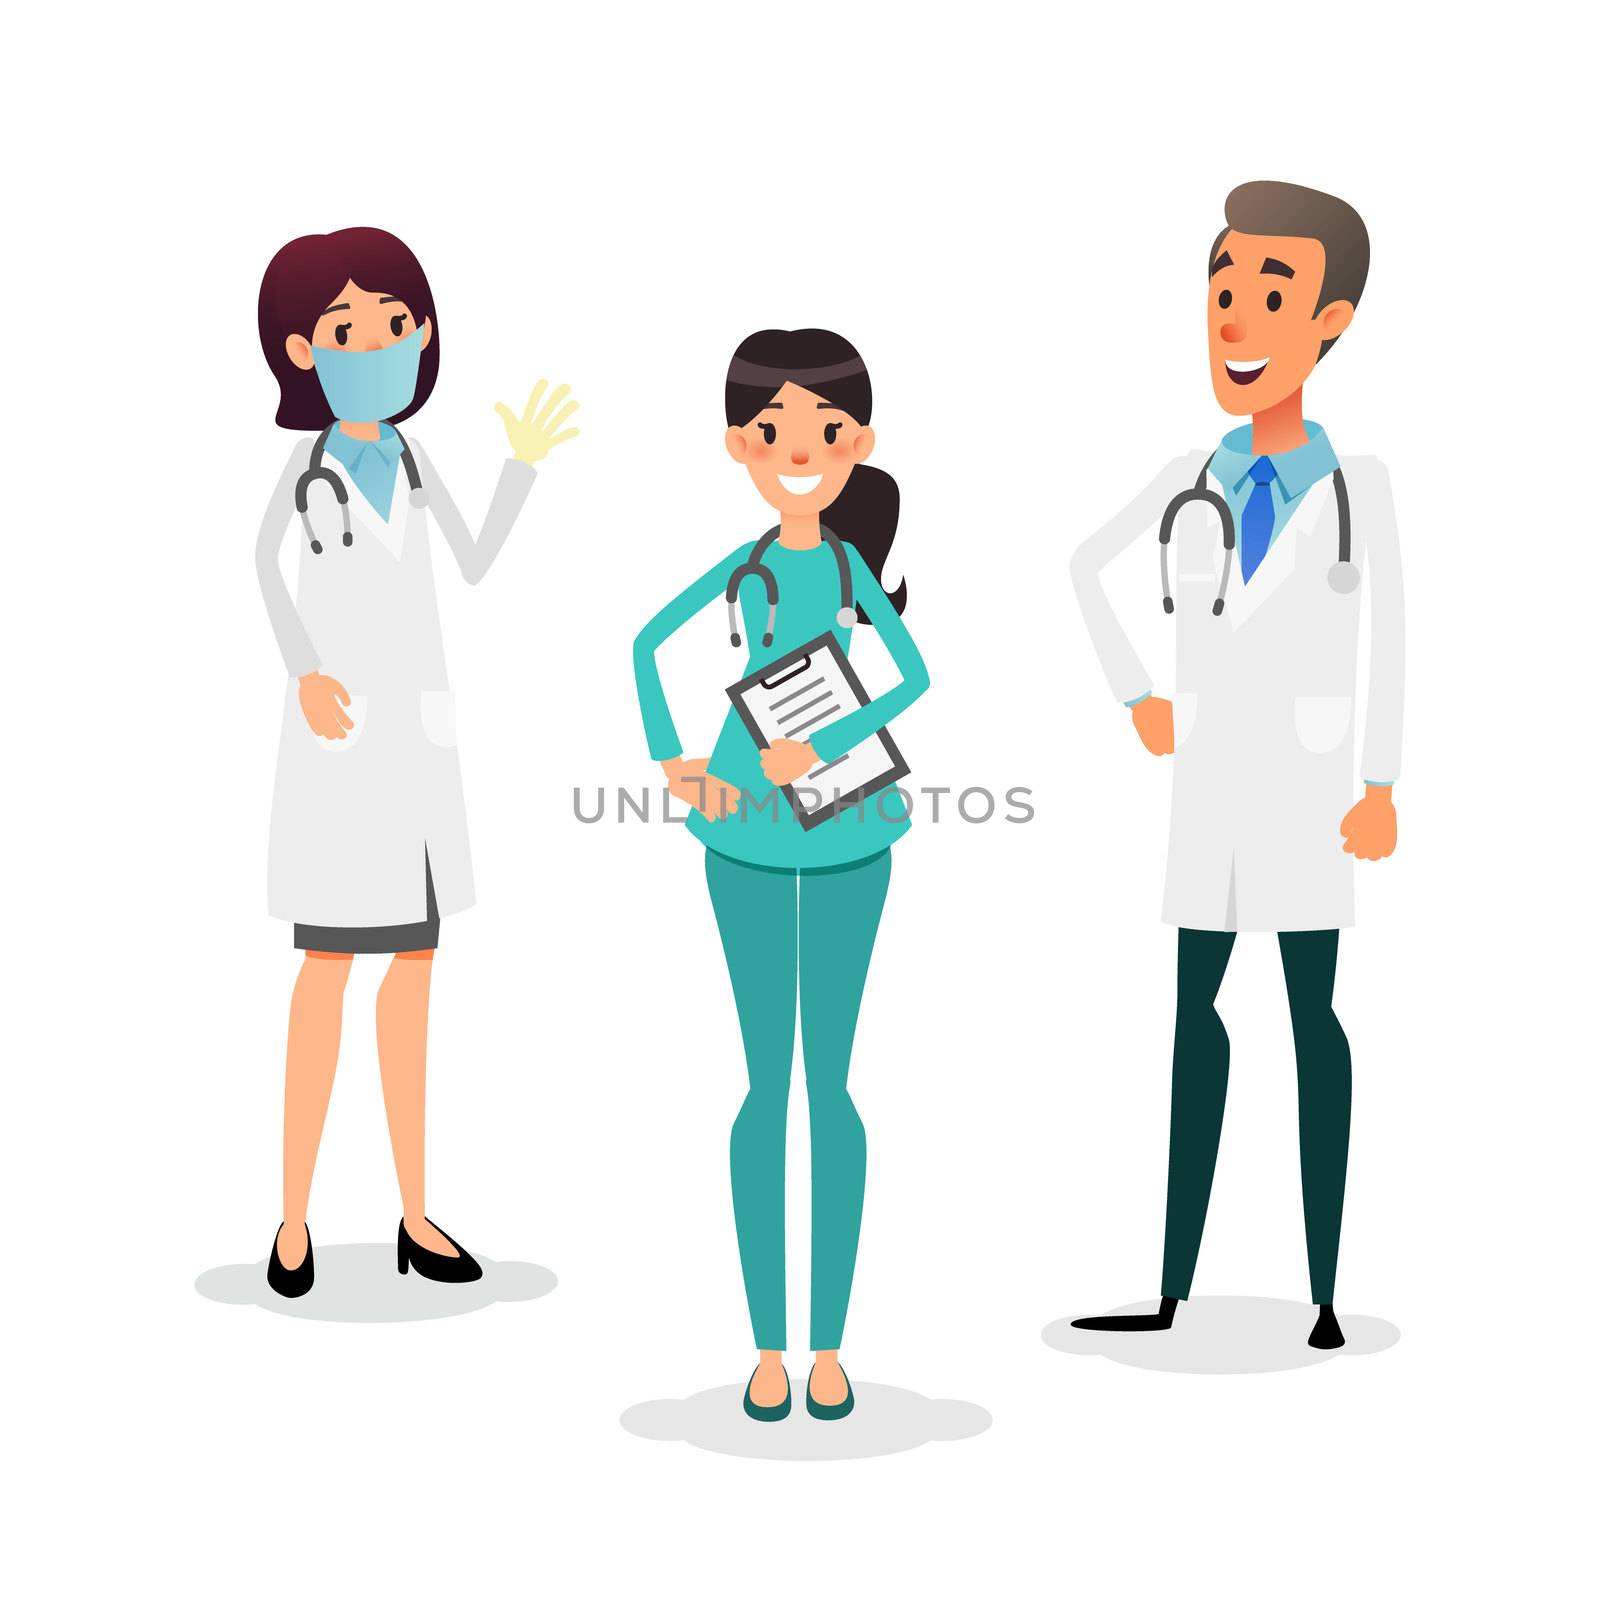 Doctors and nurses team. Cartoon medical staff. Medical team concept. Surgeon, nurse and therapist on hospital. Professional health workers. by Elena_Garder